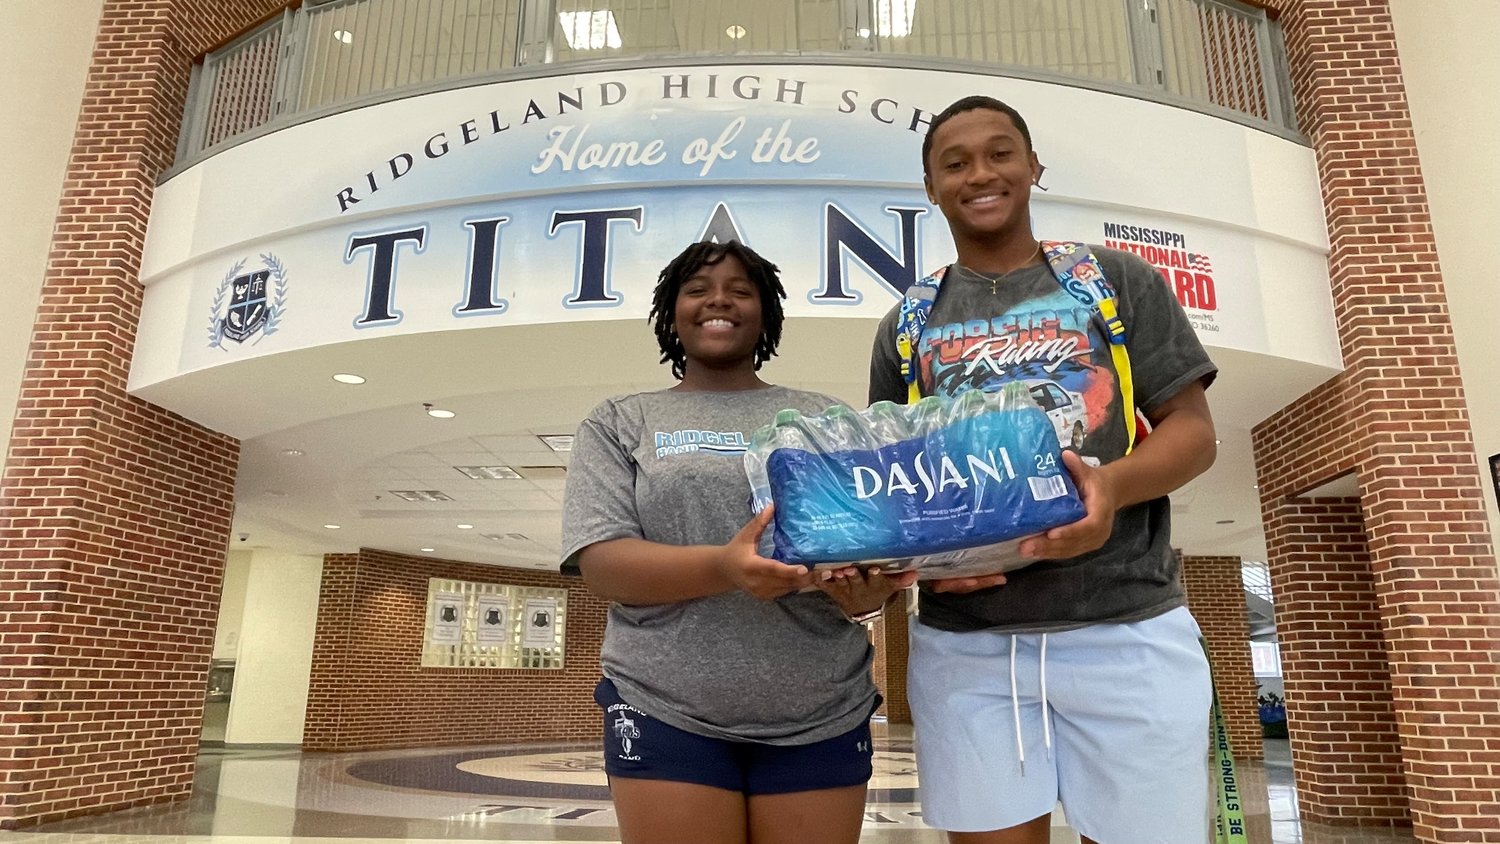 Ridgeland High School seniors James Woody and Deanna Ruffin pose with a case of water they plan to donate to Jackson Public Schools to help with the ongoing water crisis in the city of Jackson. Students from high schools across the county are participating.